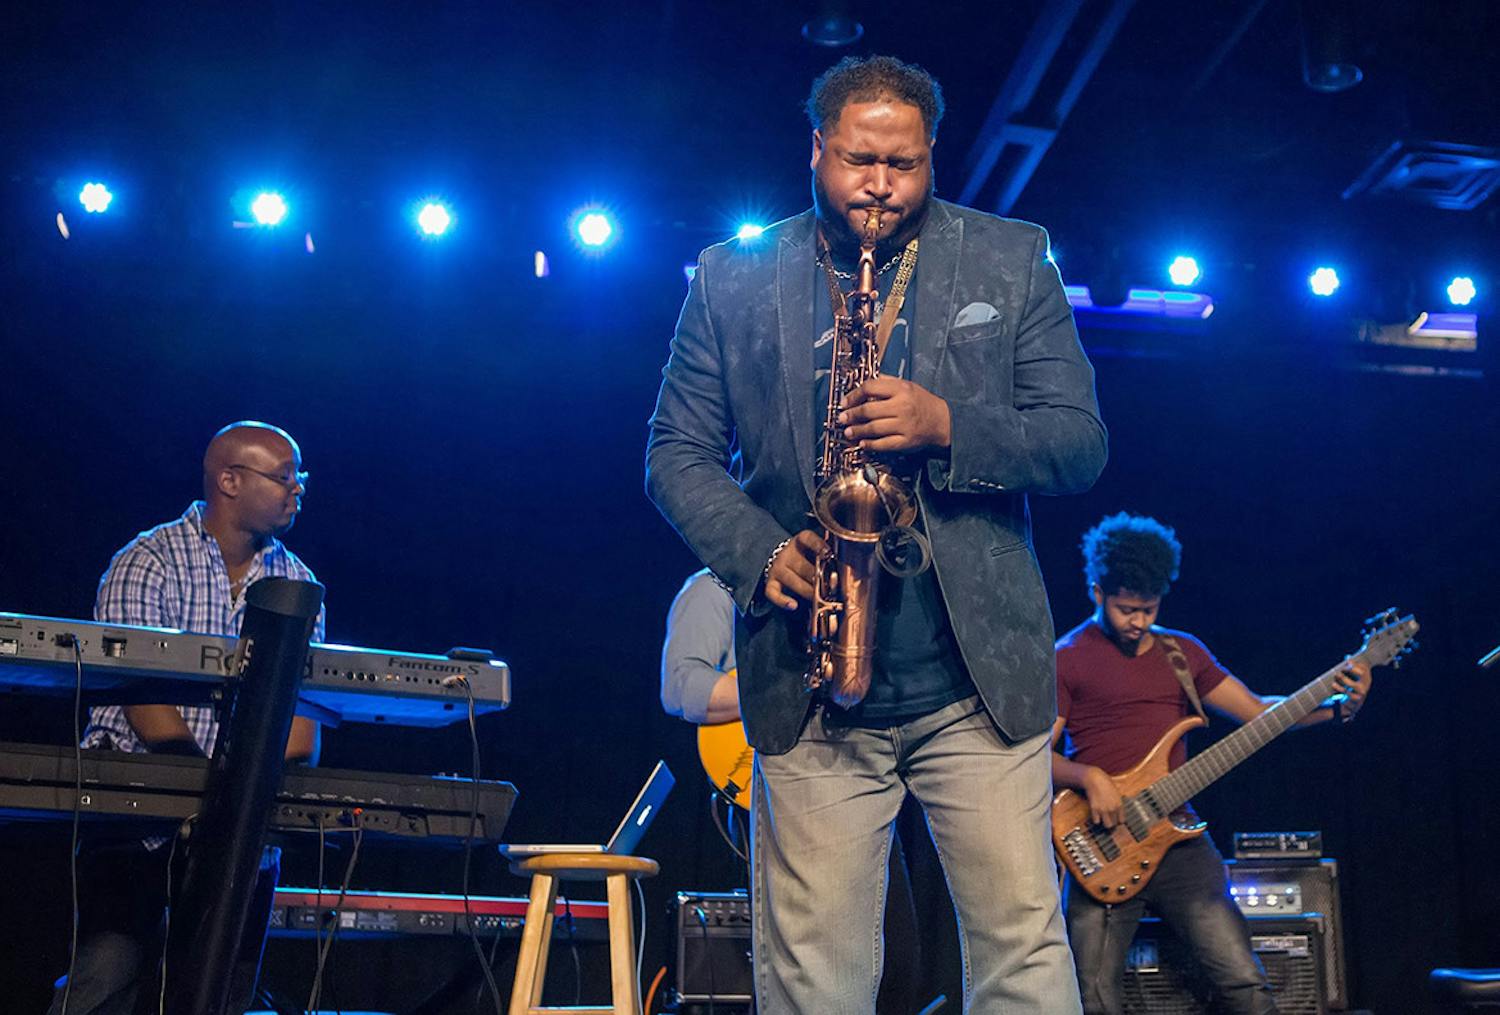 A saxophone player, keyboard player, and guitarist play their instruments to a jazz-loving crowd during a ColaJazz Fest performance. This year's festival is held on Sept. 24-25th, 2022, the ColaJazz Fest fall-edition is a weekend celebrating local and national jazz stars alike.